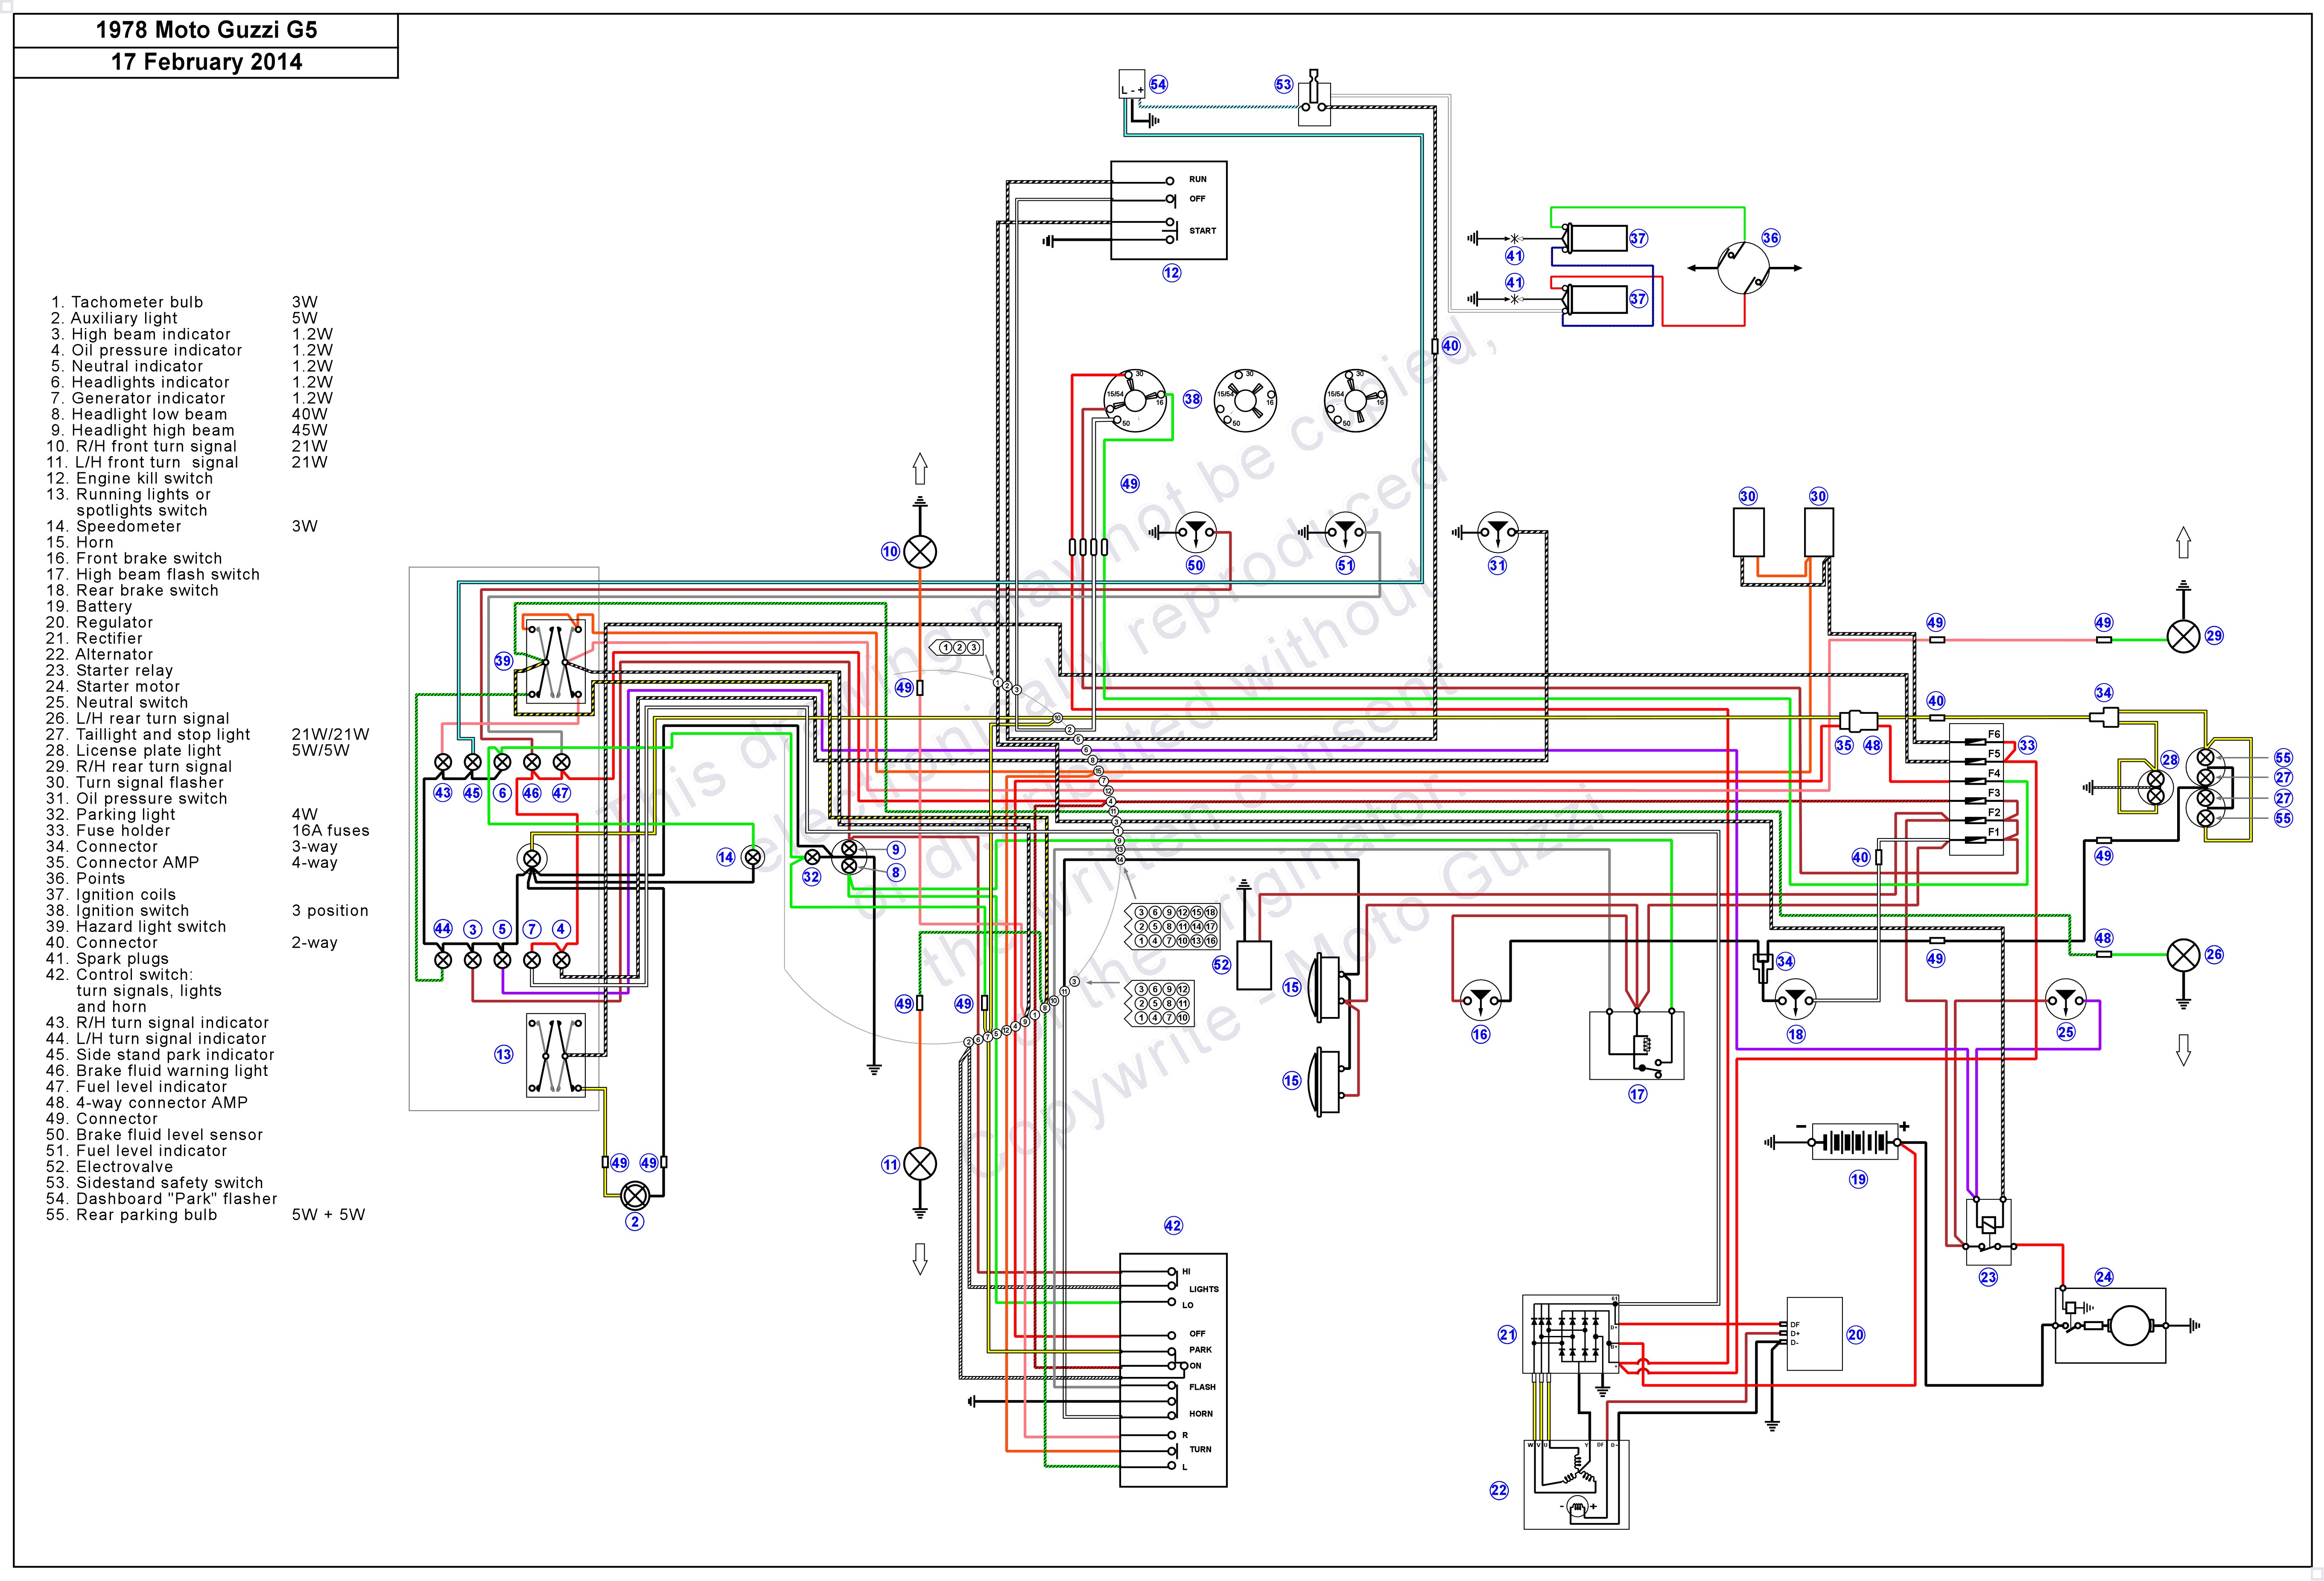 3 Wire Circuit Diagram as Well Wiring Diagram for 1980 Suzuki 550 Becker Wiring Diagram Of 3 Wire Circuit Diagram